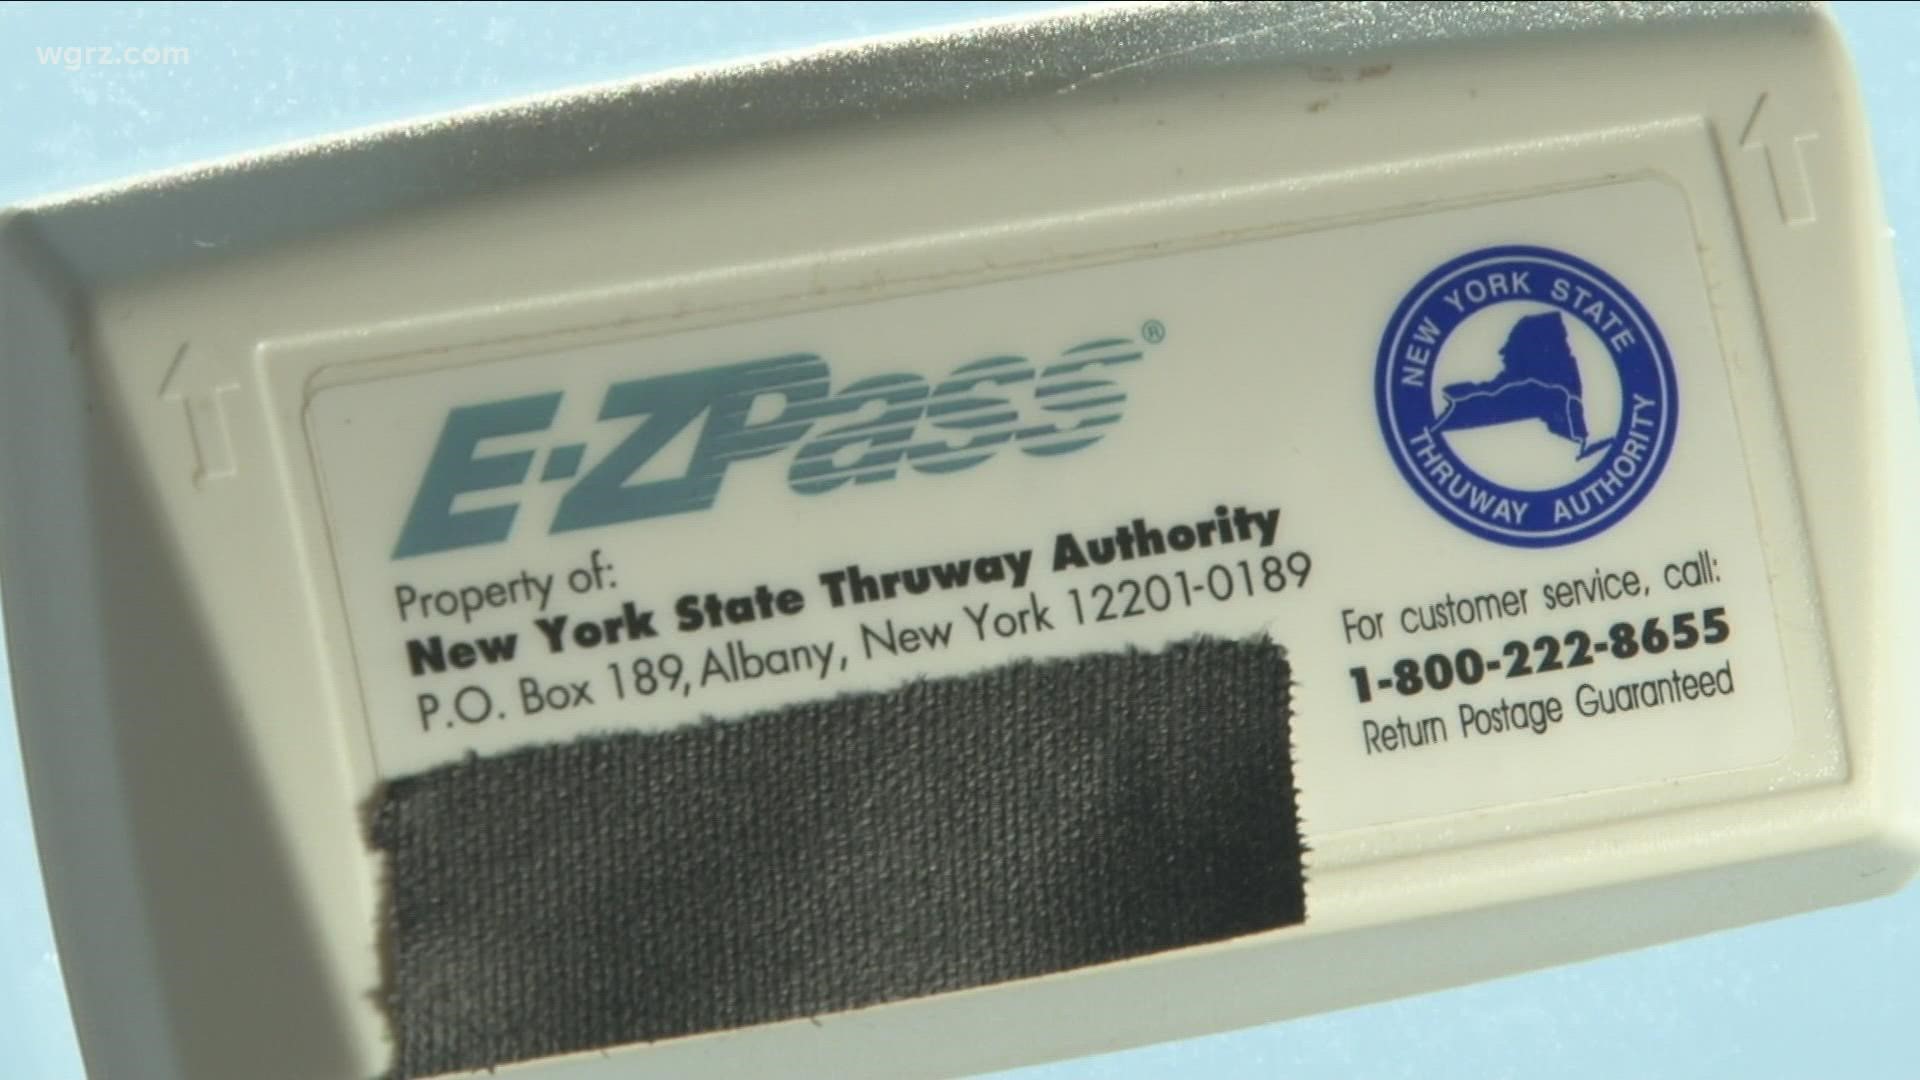 Overcharges, customer service issues, EZ Pass headaches